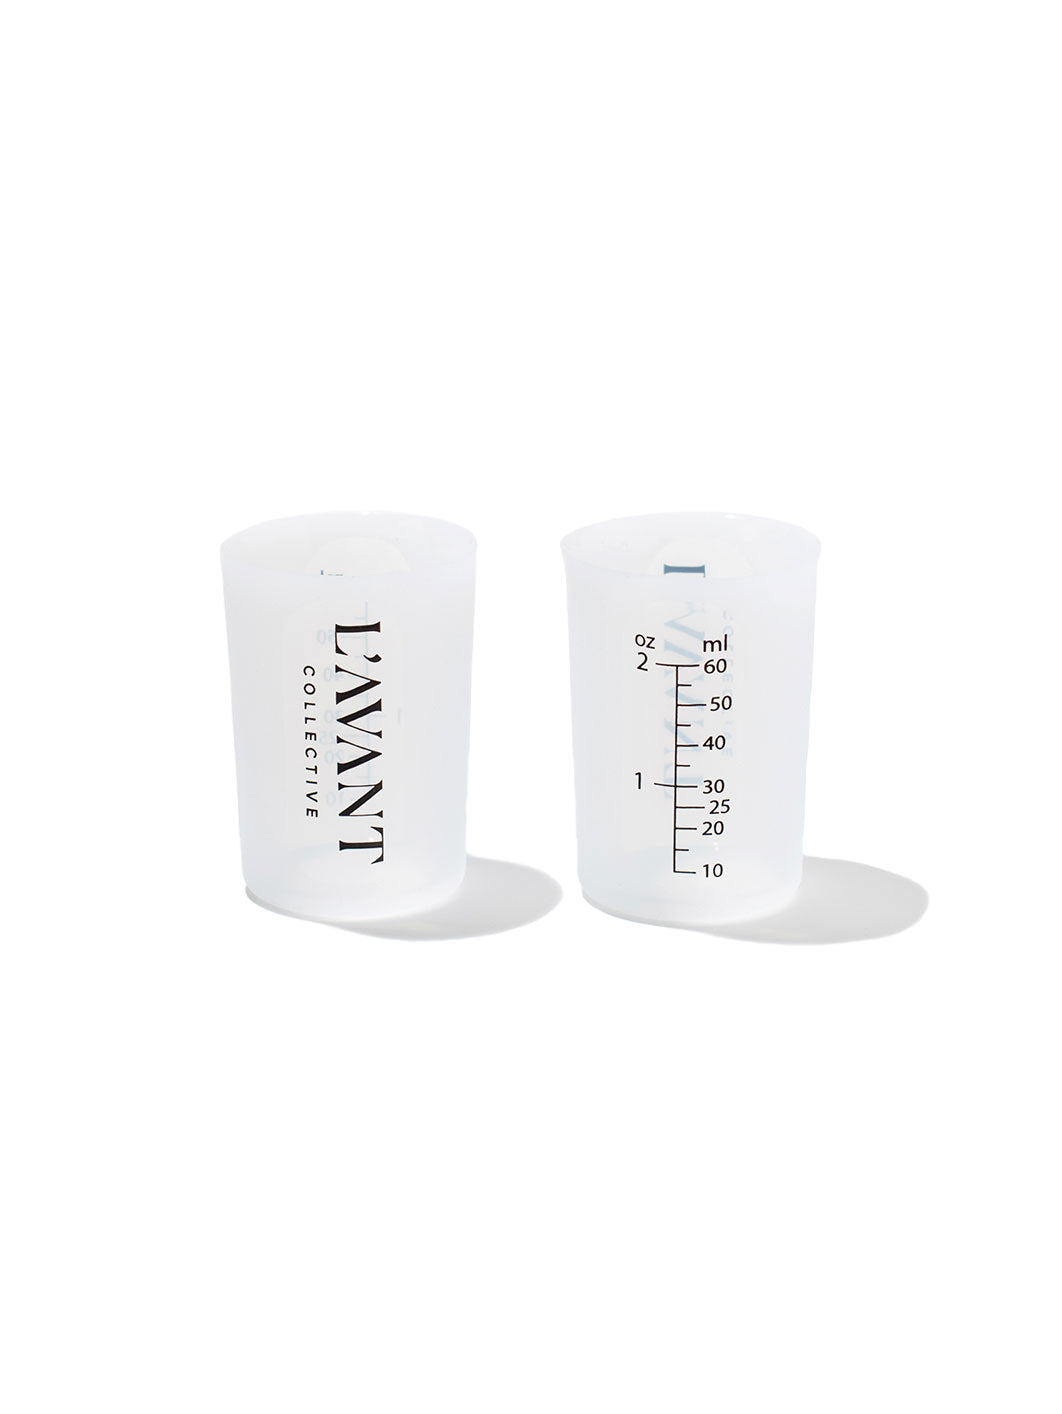 2oz silicone laundry measuring cup customized with L'AVANT Collective logo